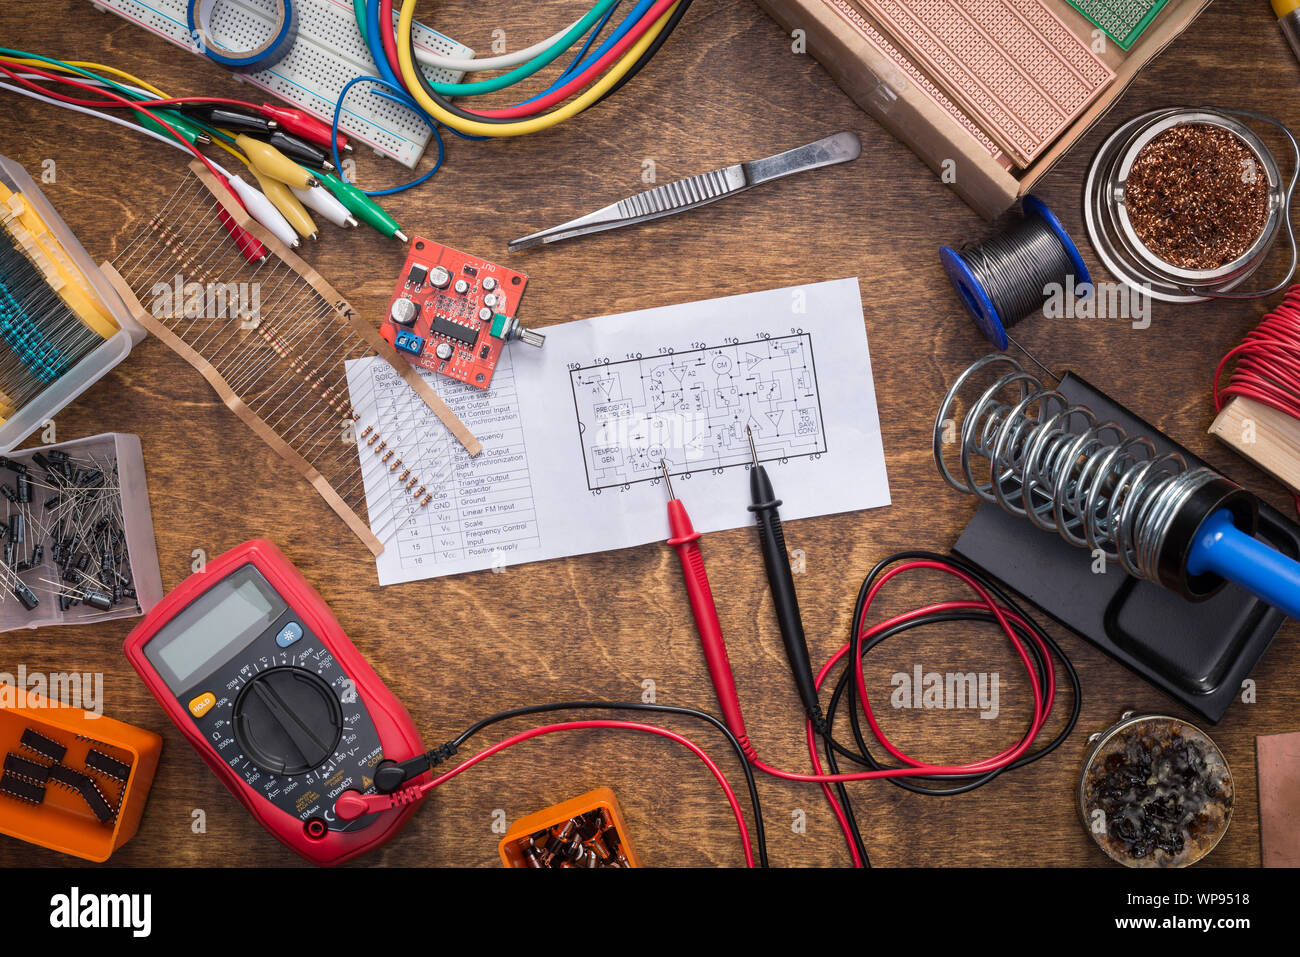 Schematic diagram on the table. DIY, electronics, repair, making concept. Stock Photo